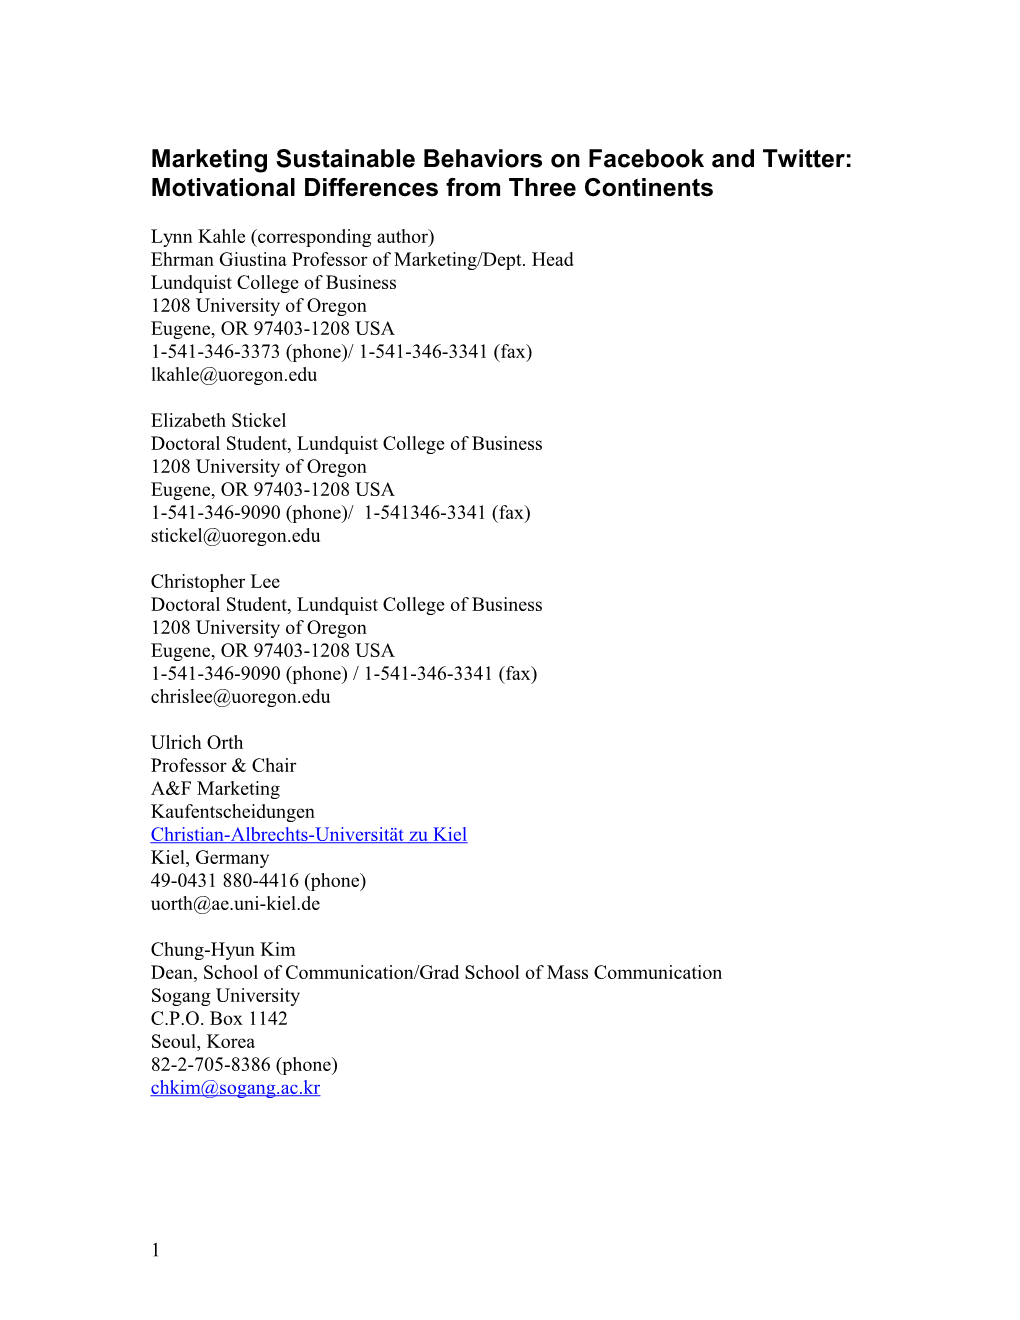 Marketing Sustainable Behaviors on Facebook and Twitter: Motivational Differences From